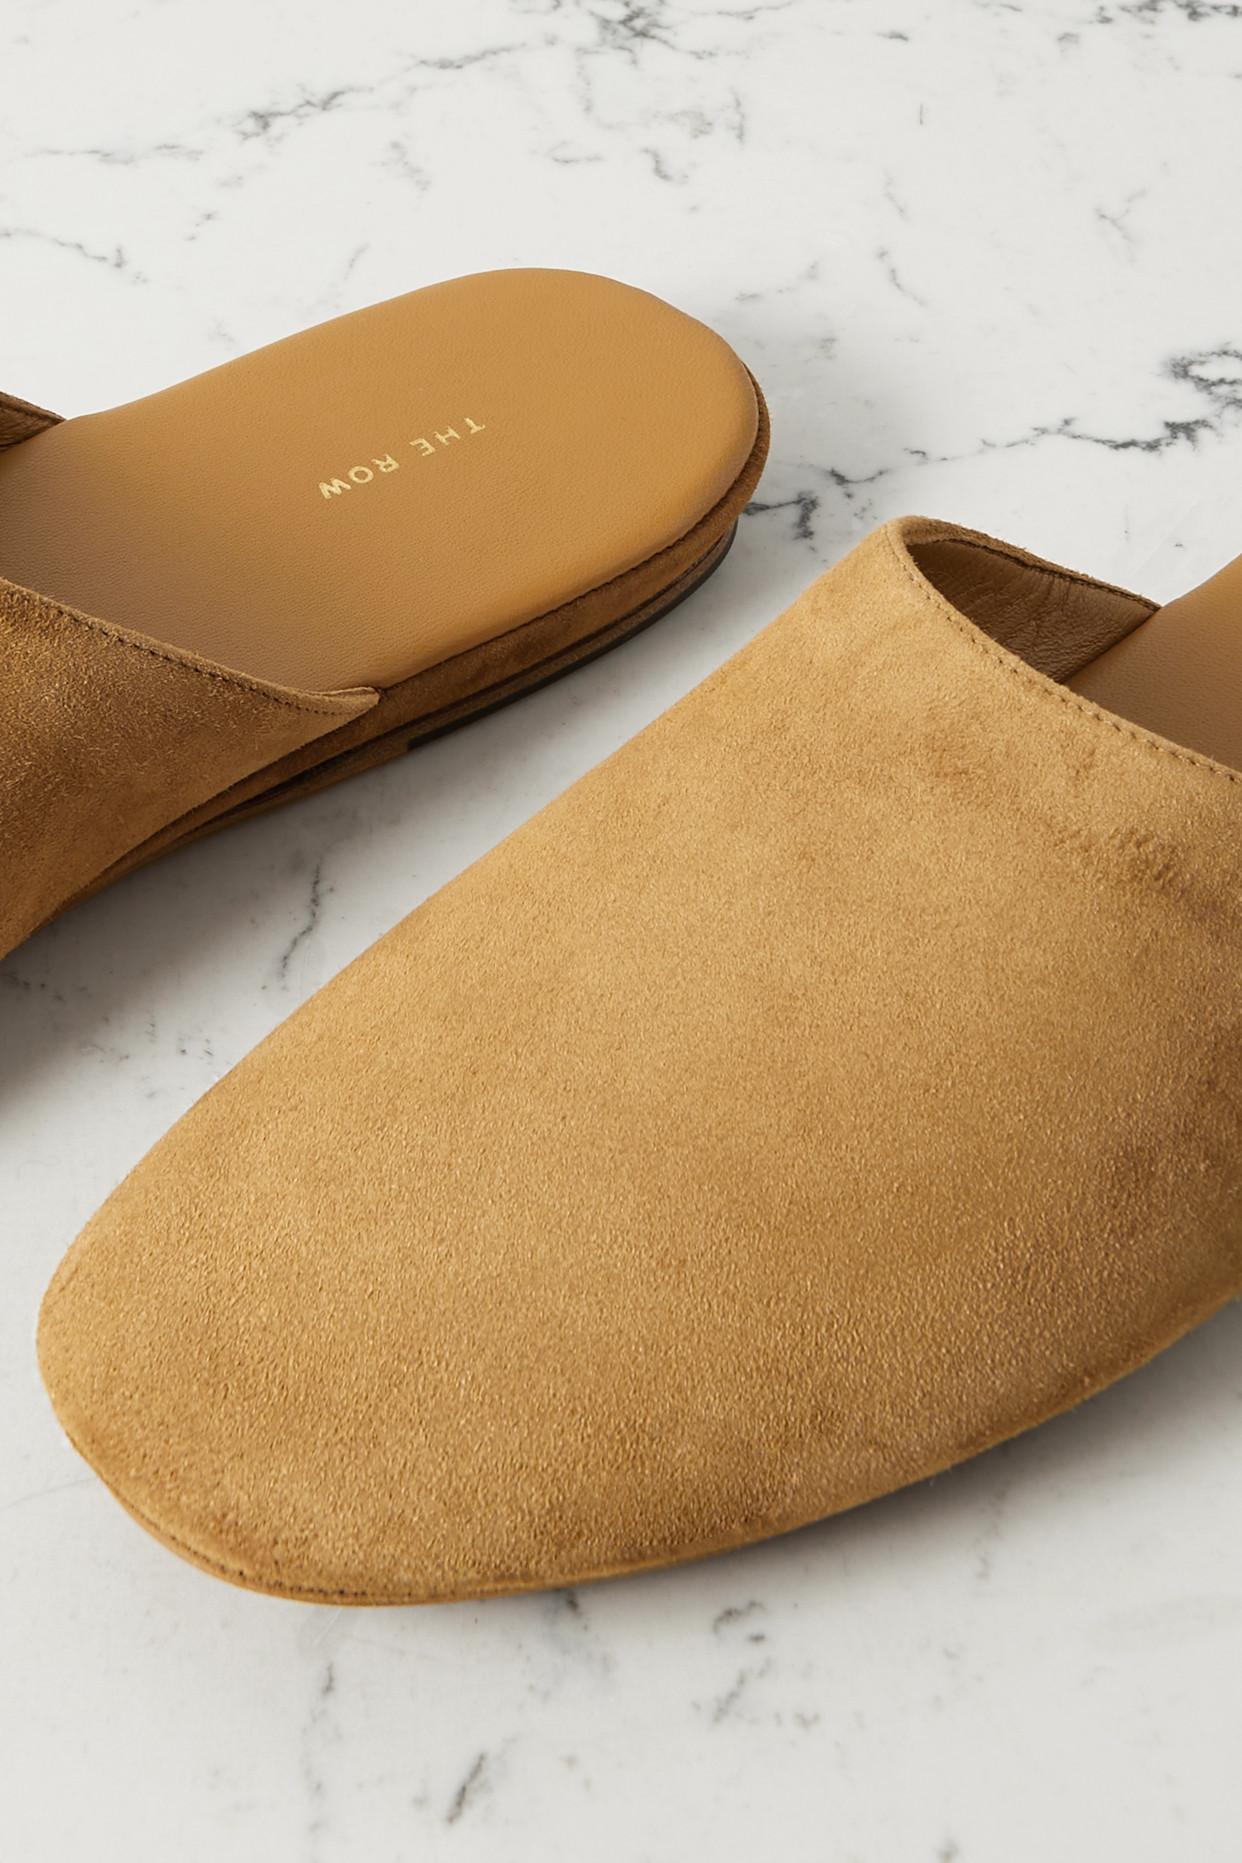 The Row Franco Suede Slippers